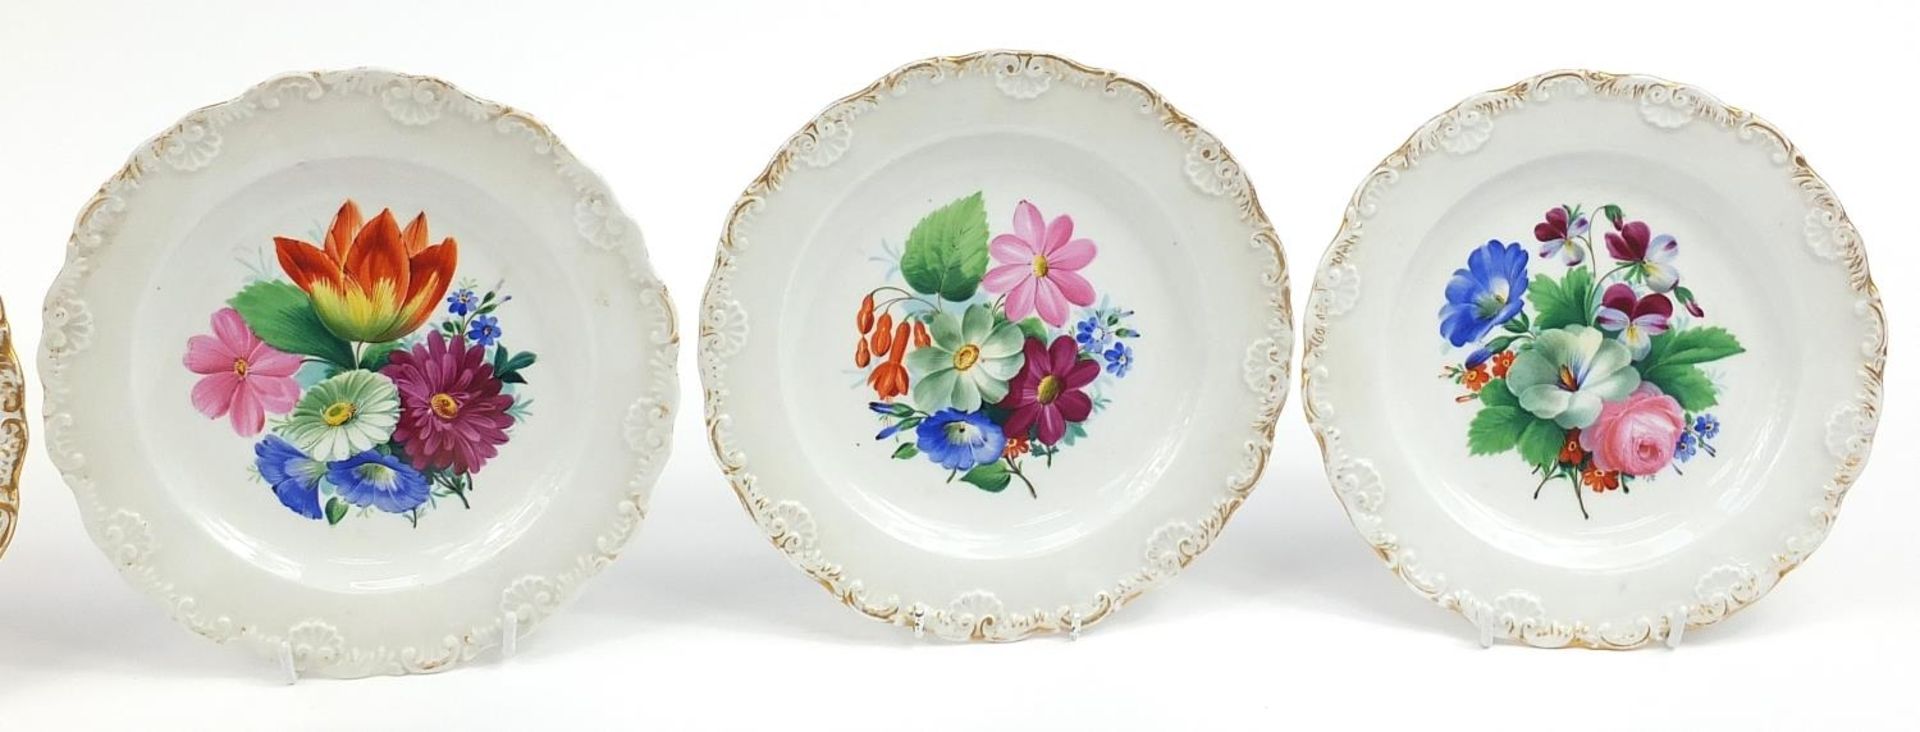 Meissen, set of six German porcelain plates hand painted with flowers, each 21cm in diameter - Image 3 of 5